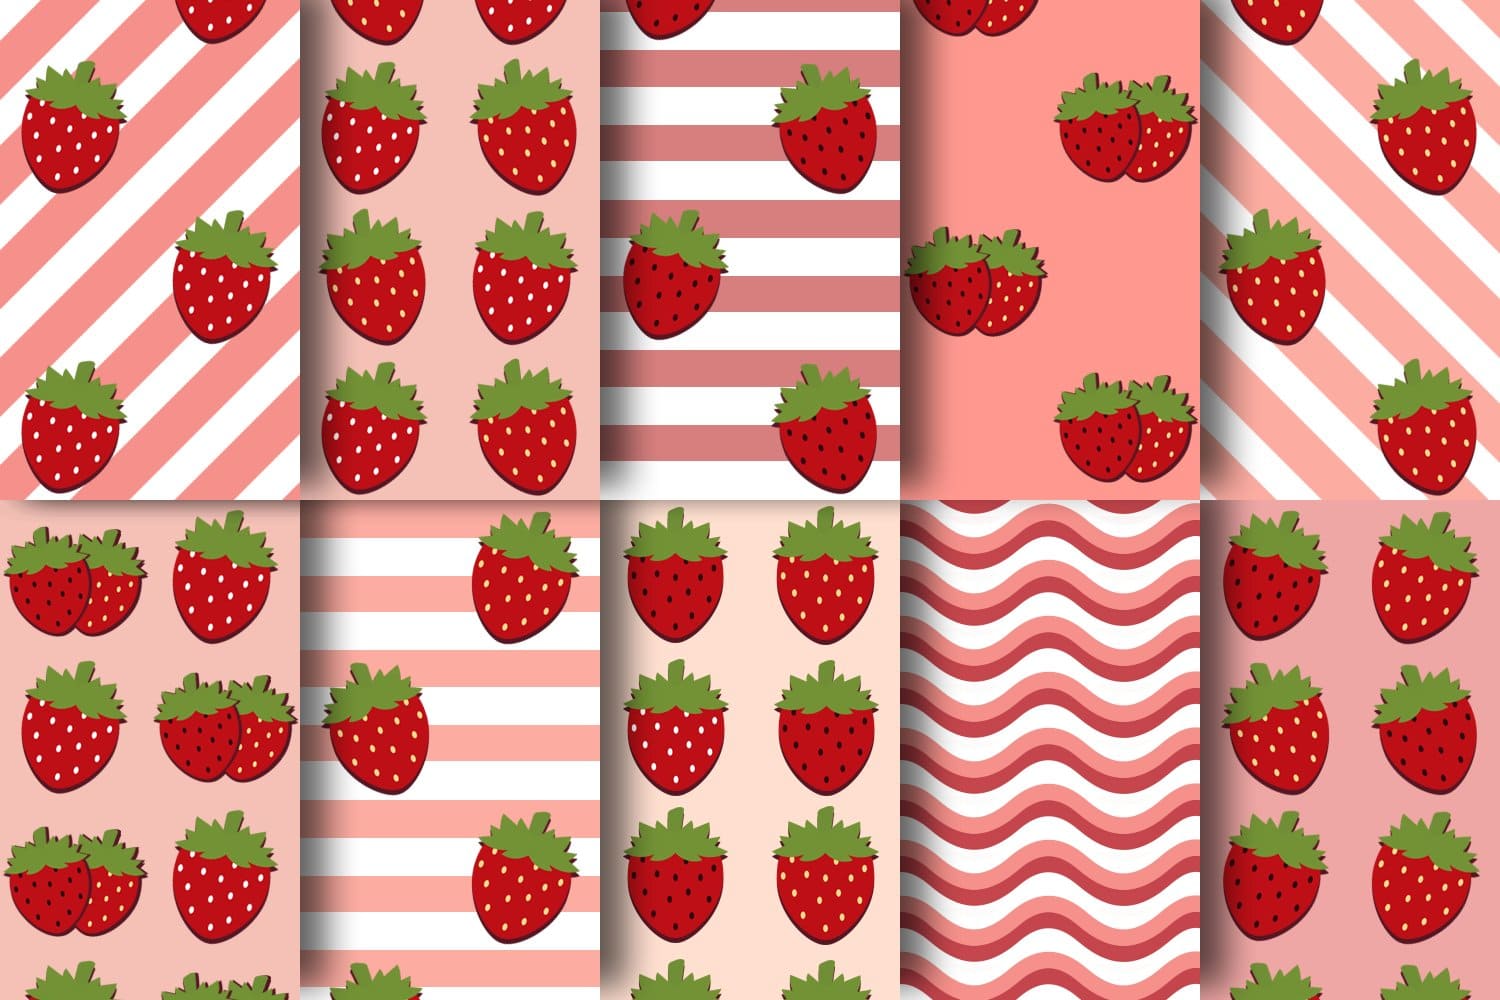 Strawberries are drawn on pink or white-pink backgrounds.